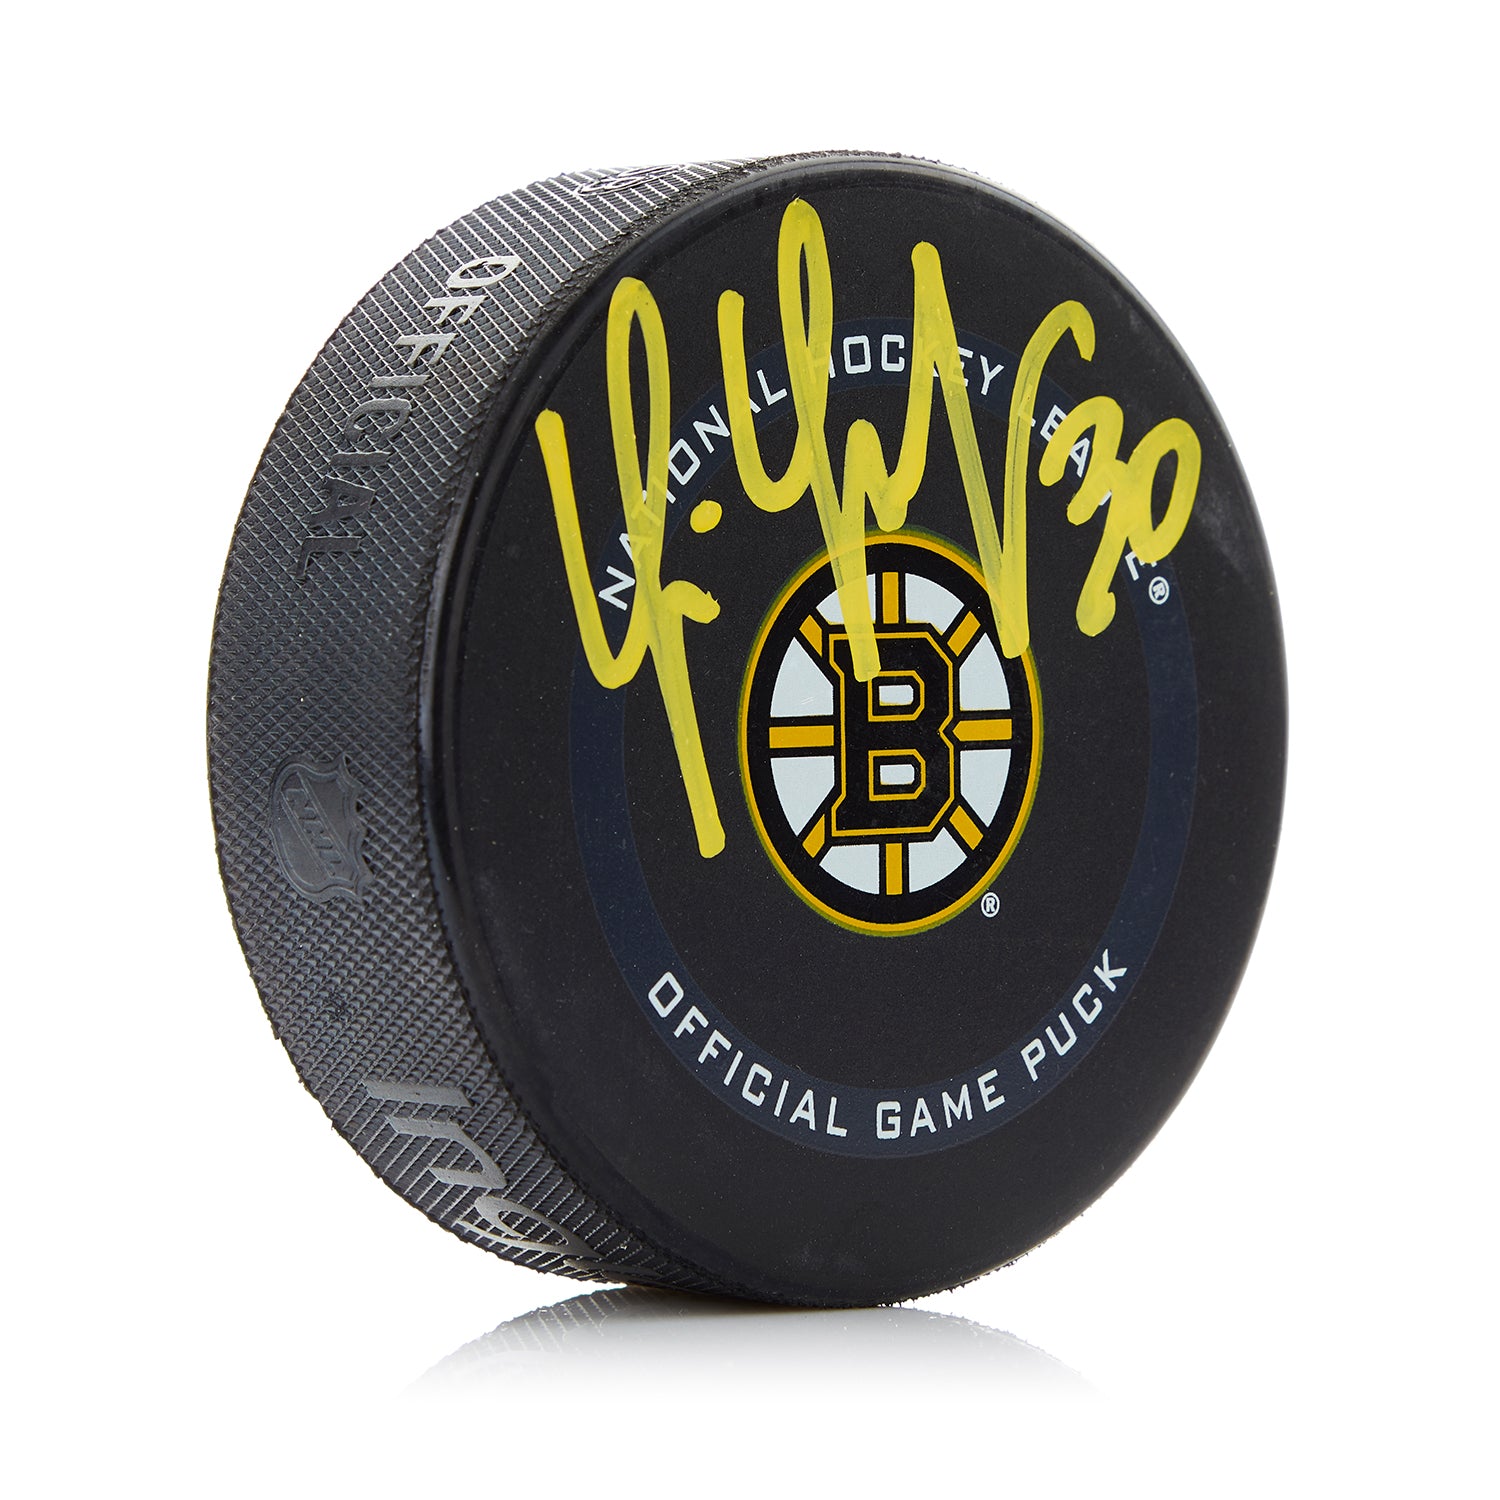 Tim Thomas Signed Boston Bruins Official Game Puck